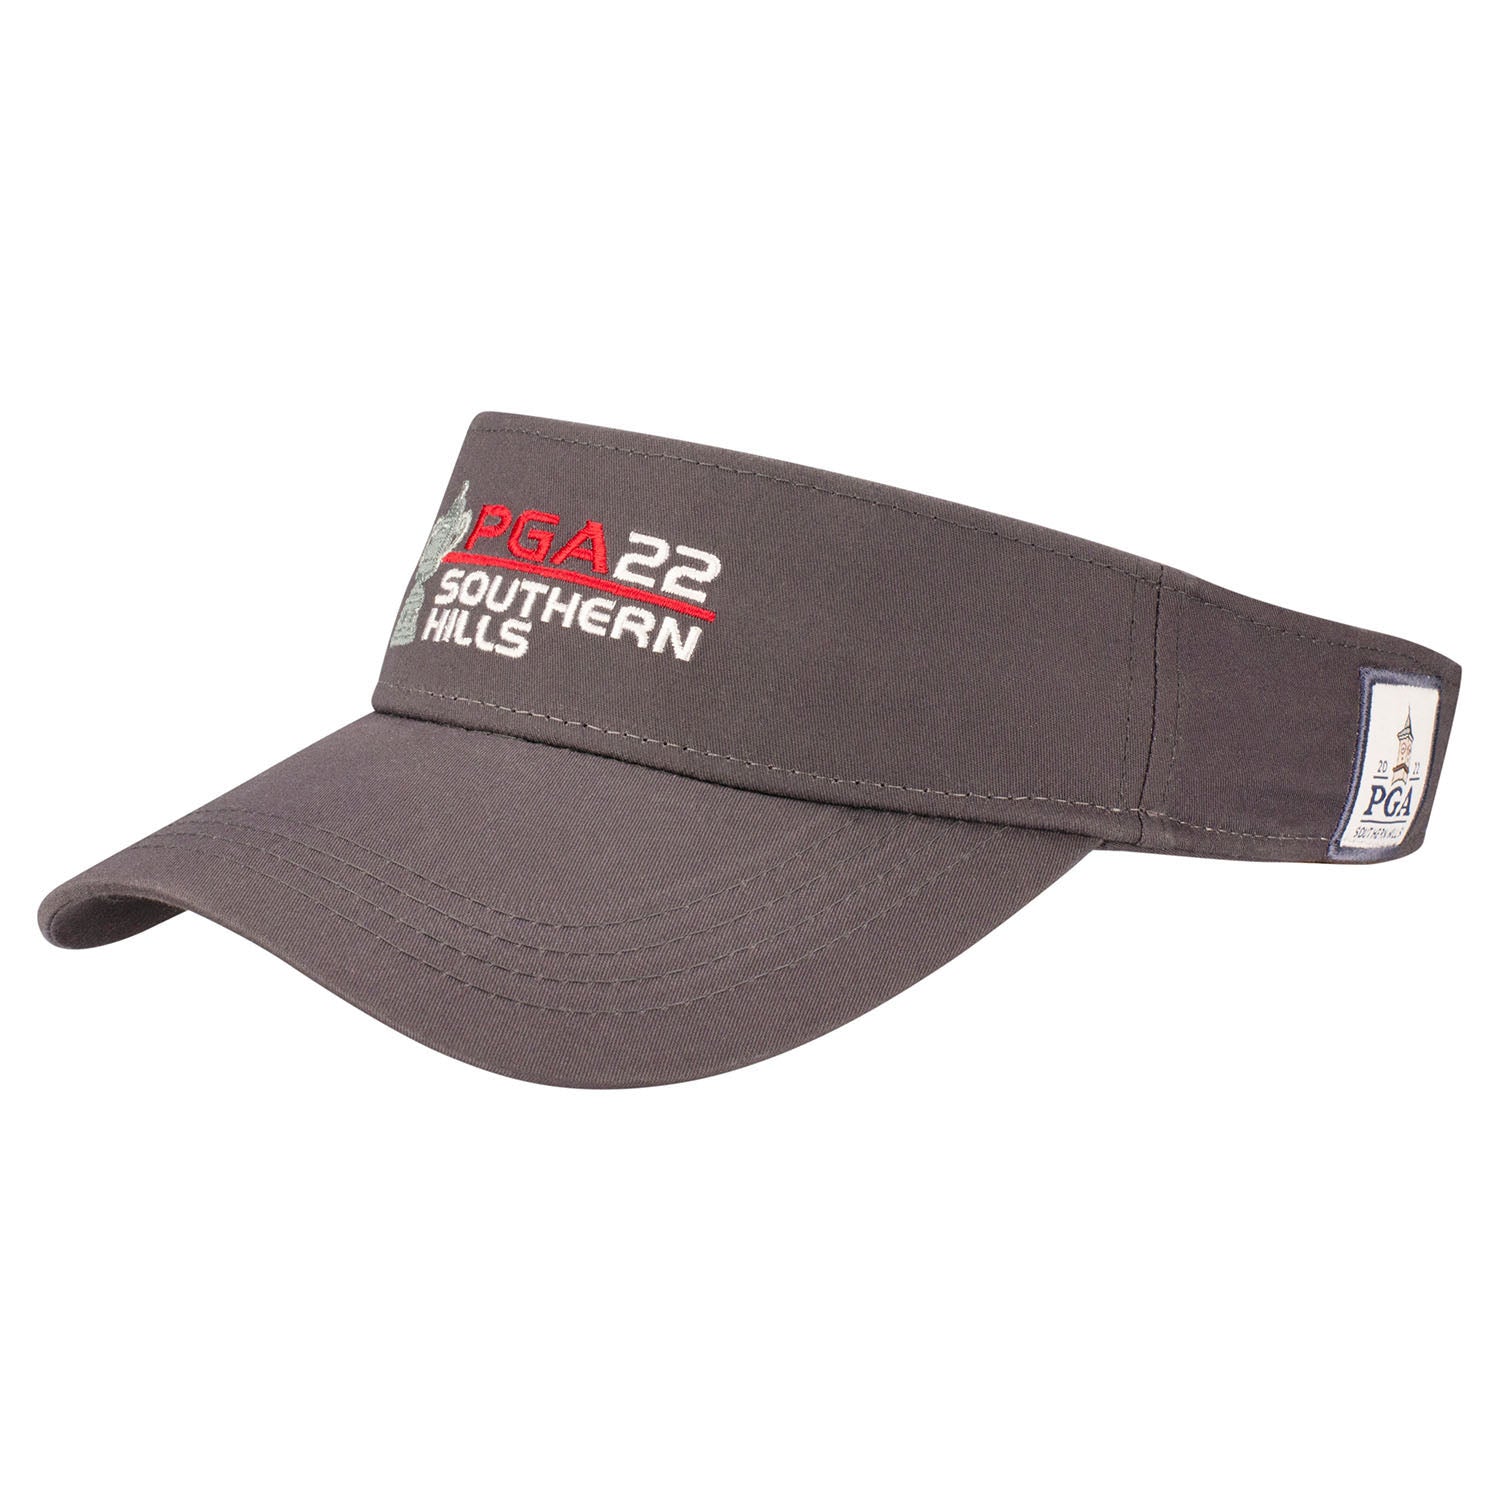 AHEAD Art Visor in Graphite- Front View